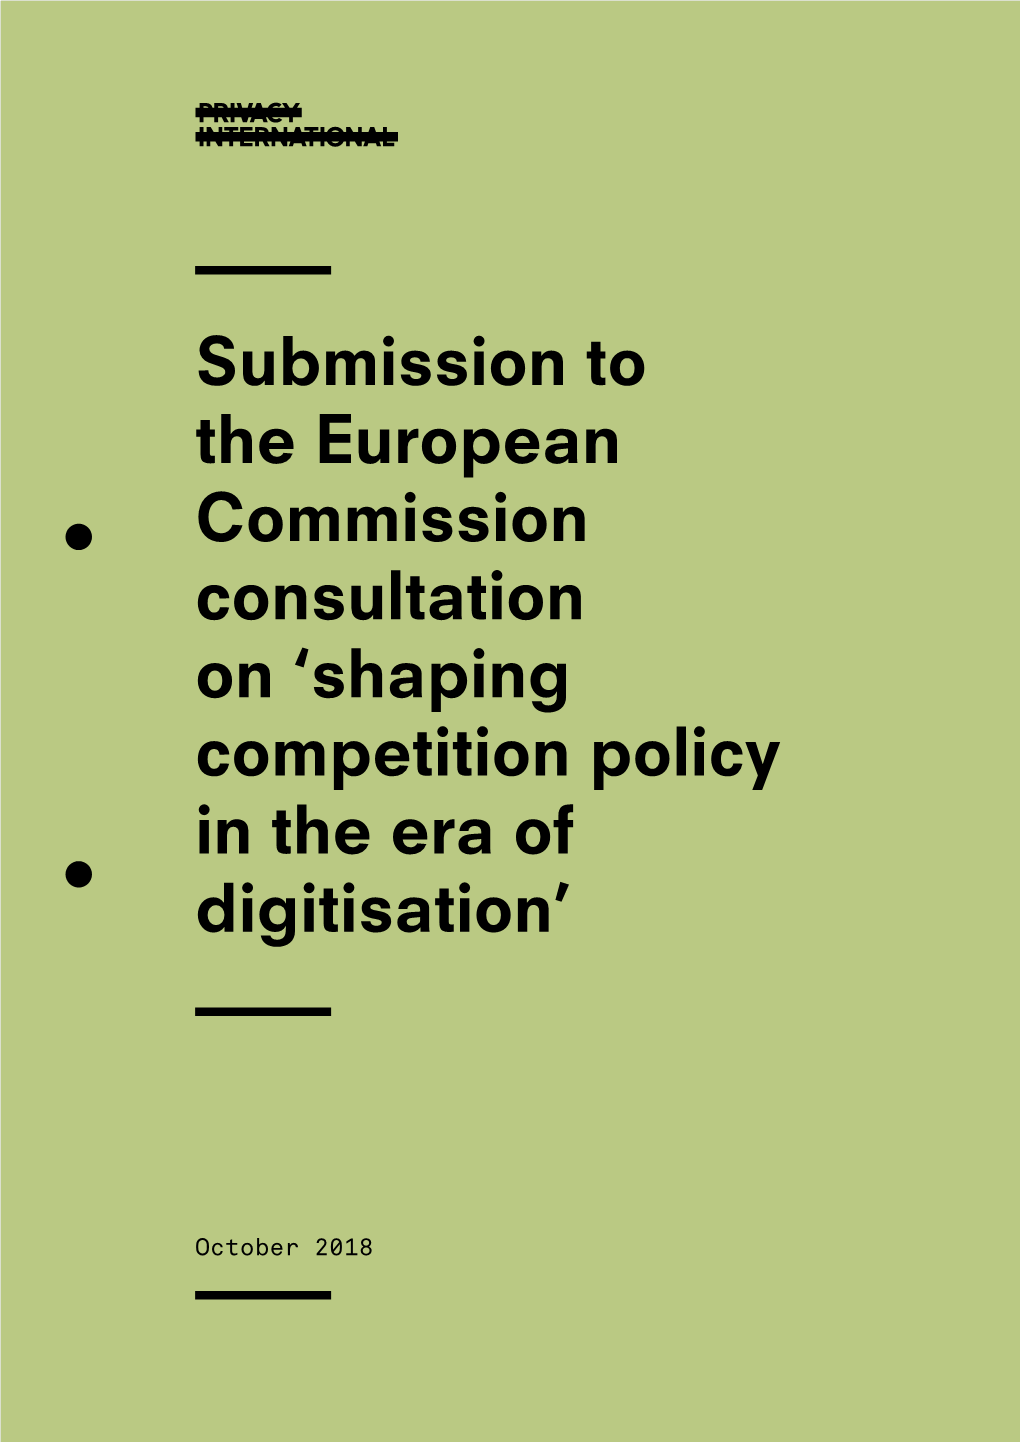 Submission to the European Commission Consultation on ‘Shaping Competition Policy in the Era of Digitisation’